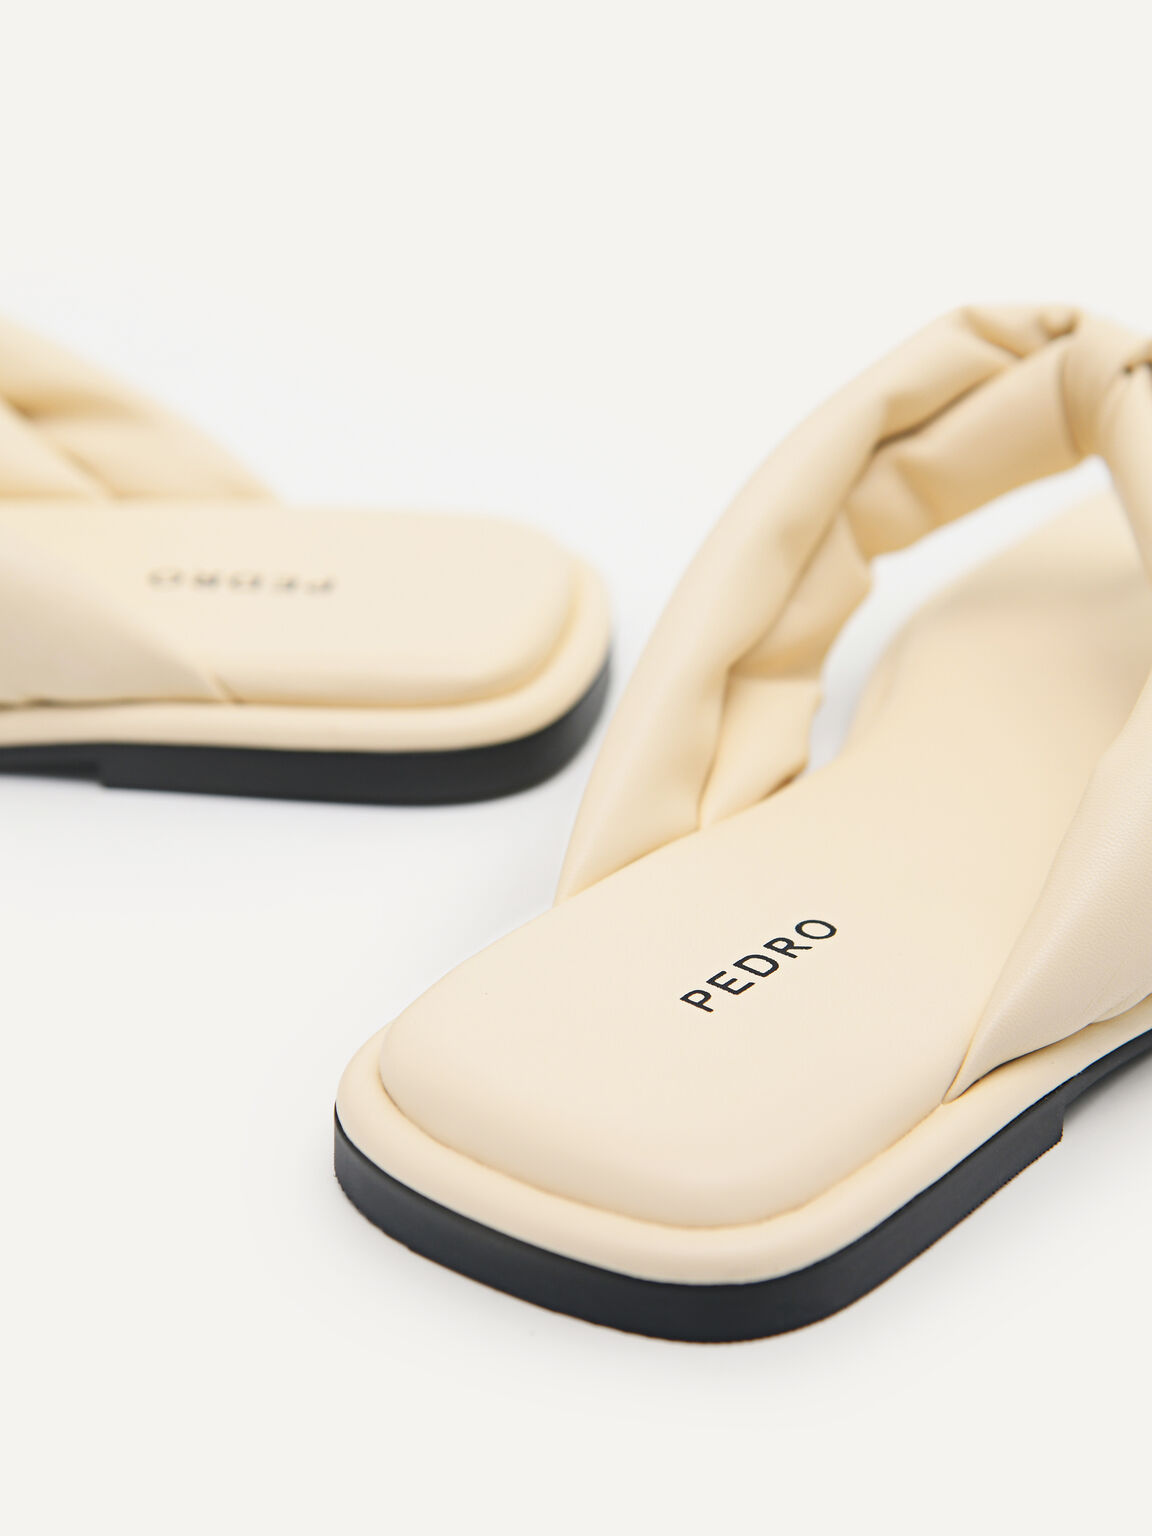 Padded Sandals, Beige